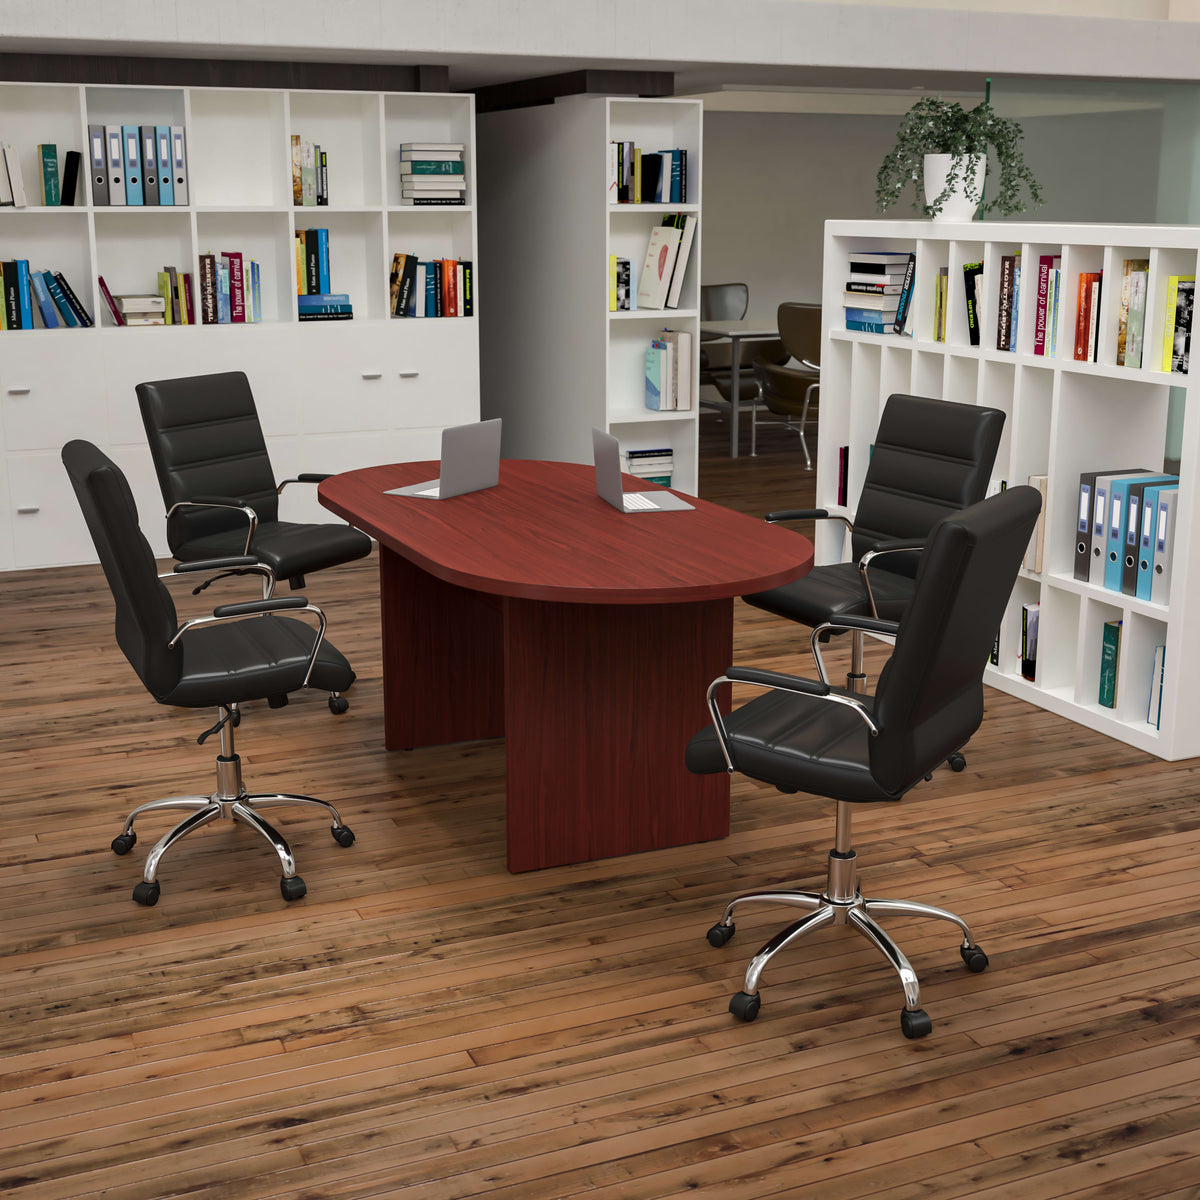 Cherry |#| 5 Piece Cherry Oval Conference Table with 4 Black/Chrome LeatherSoft Chairs